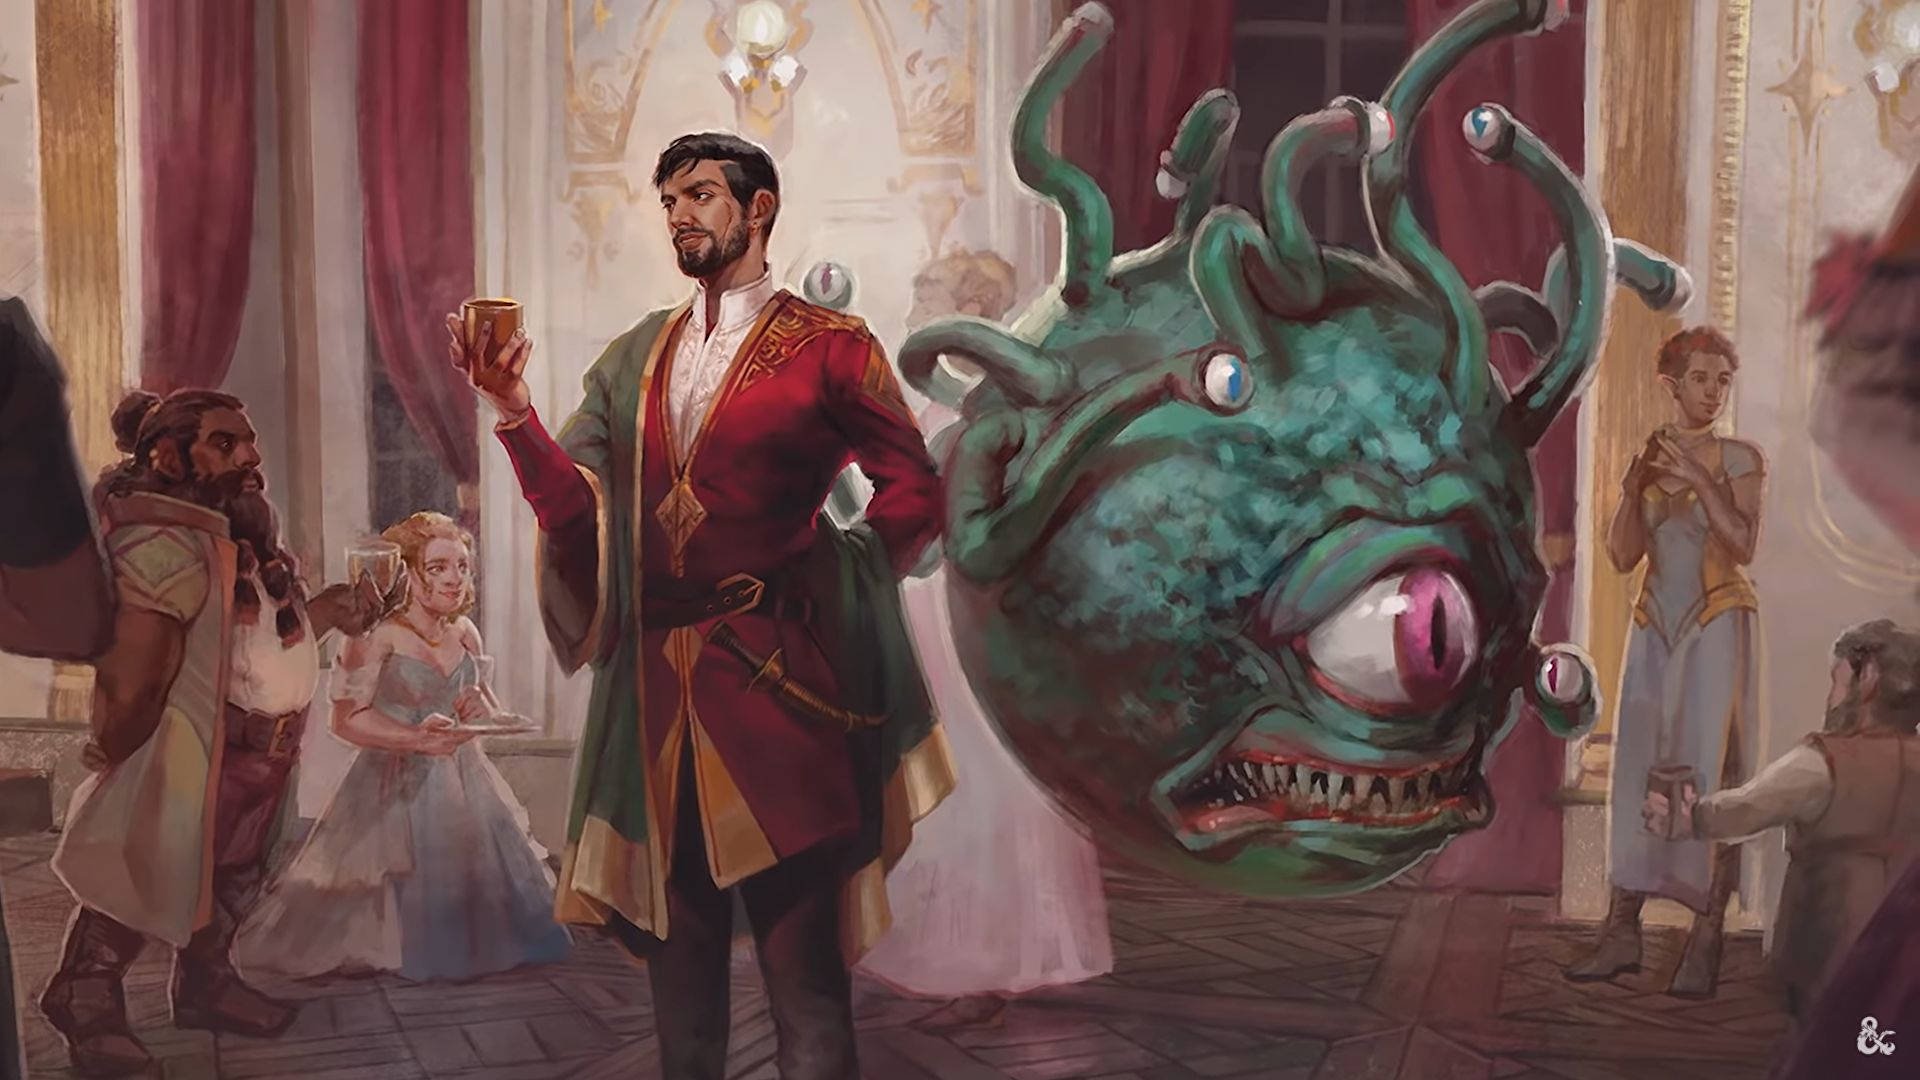 DnD Backgrounds 5E - Wizards of the Coast art of a noble person standing next to a Beholder